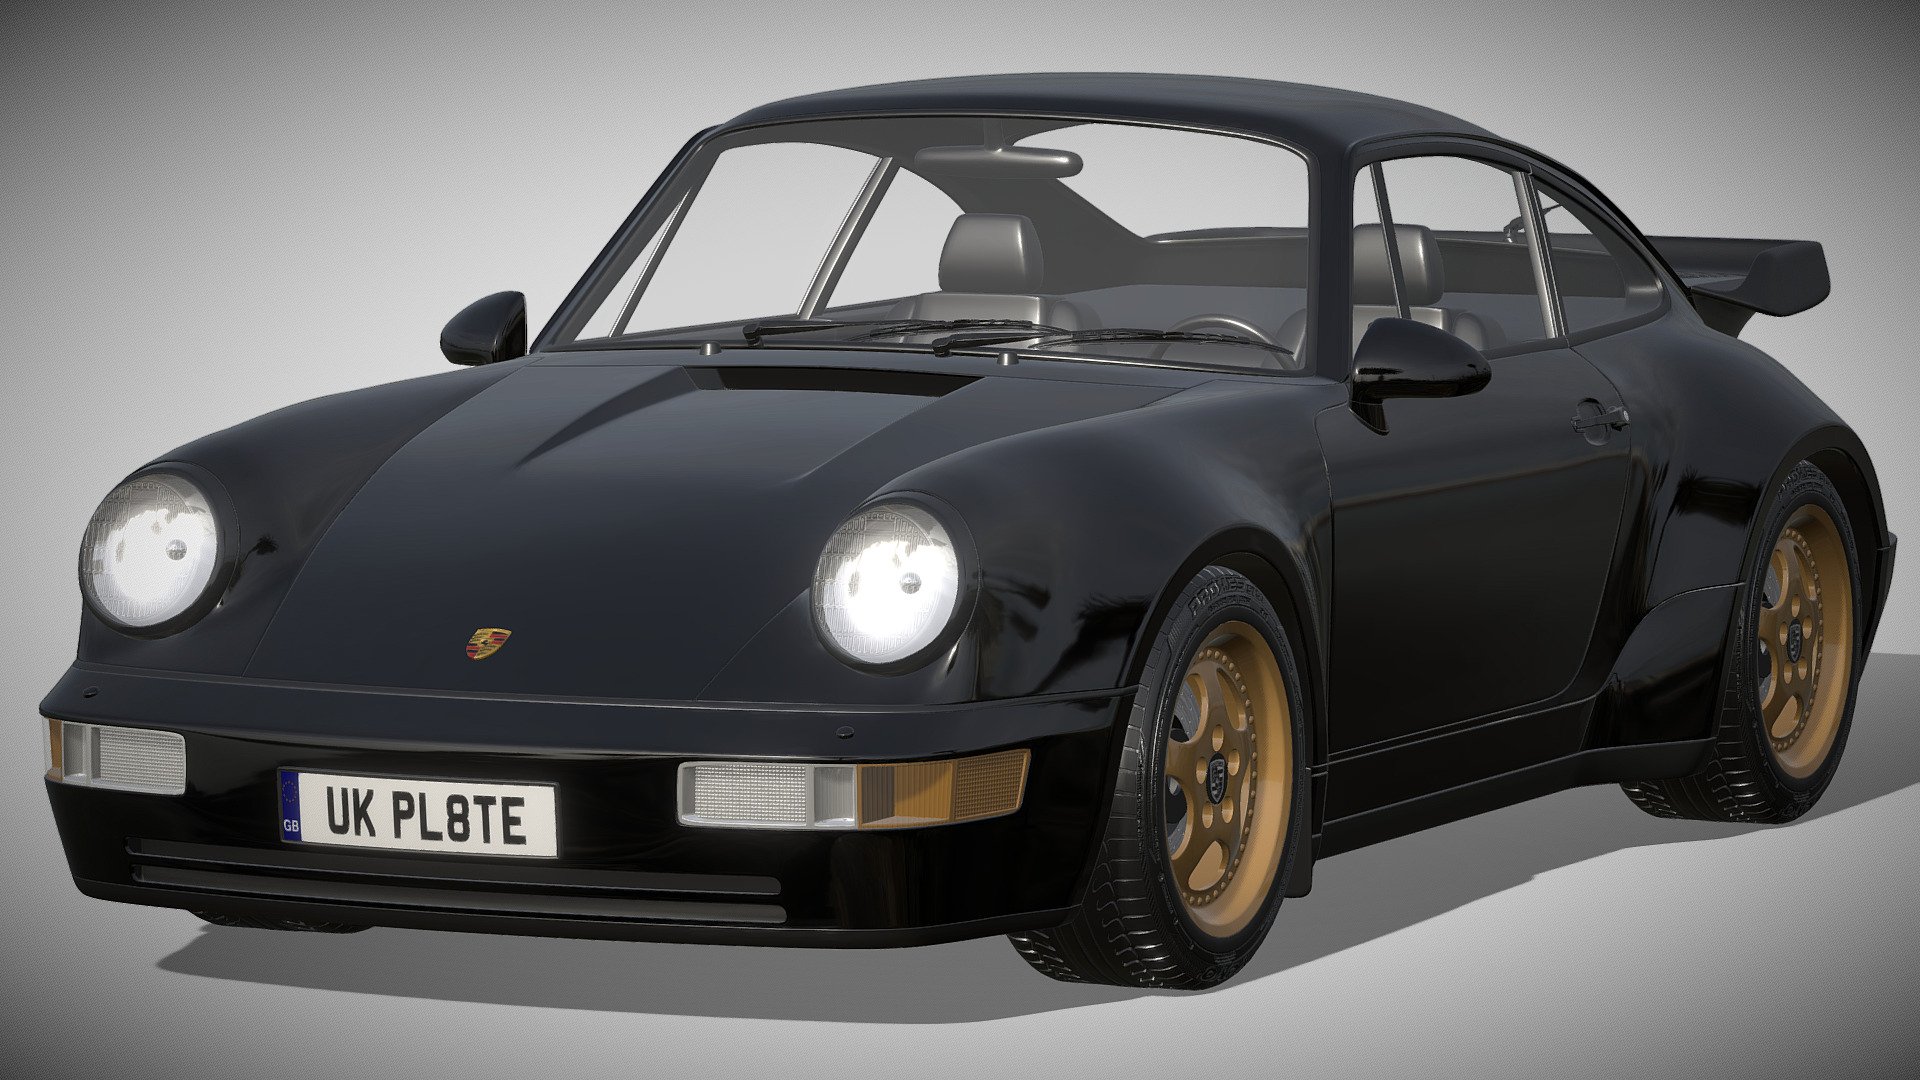 Porsche 911 964 Turbo 1993

https://en.wikipedia.org/wiki/Porsche_964

Clean geometry Light weight model, yet completely detailed for HI-Res renders. Use for movies, Advertisements or games

Corona render and materials

All textures include in *.rar files

Lighting setup is not included in the file! - Porsche 911 964 Turbo 1993 - Buy Royalty Free 3D model by zifir3d 3d model